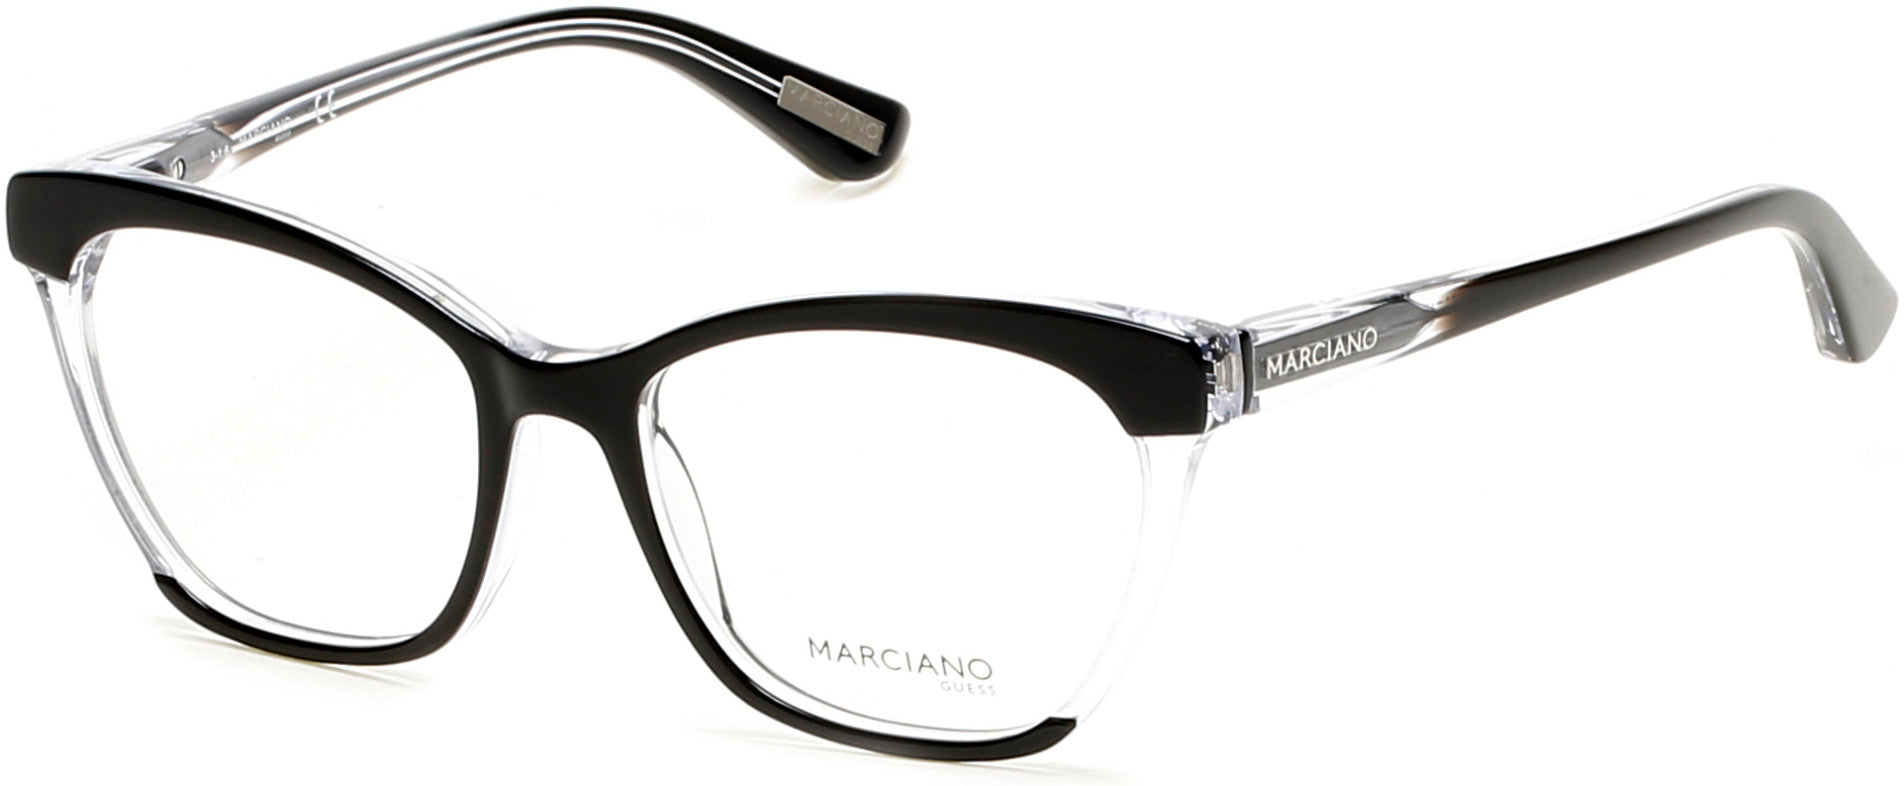 Guess By Marciano GM0287 Cat Eyeglasses 003-003 - Black/crystal